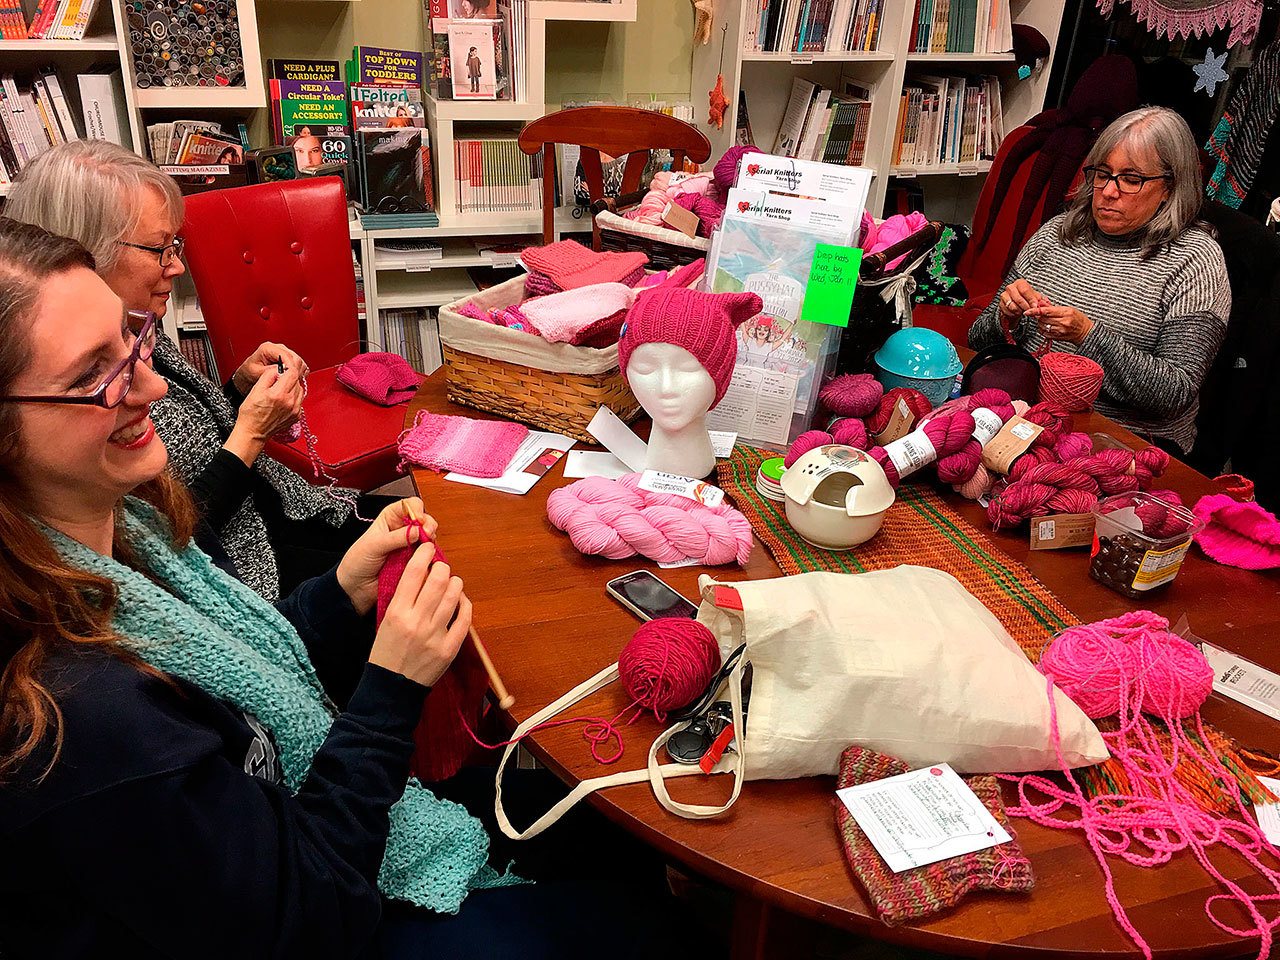 Participants in the Women’s March are knitting pink “Pussyhats,” stocking caps with cat ears, which have come to symbolize women’s rights. Contributed photo